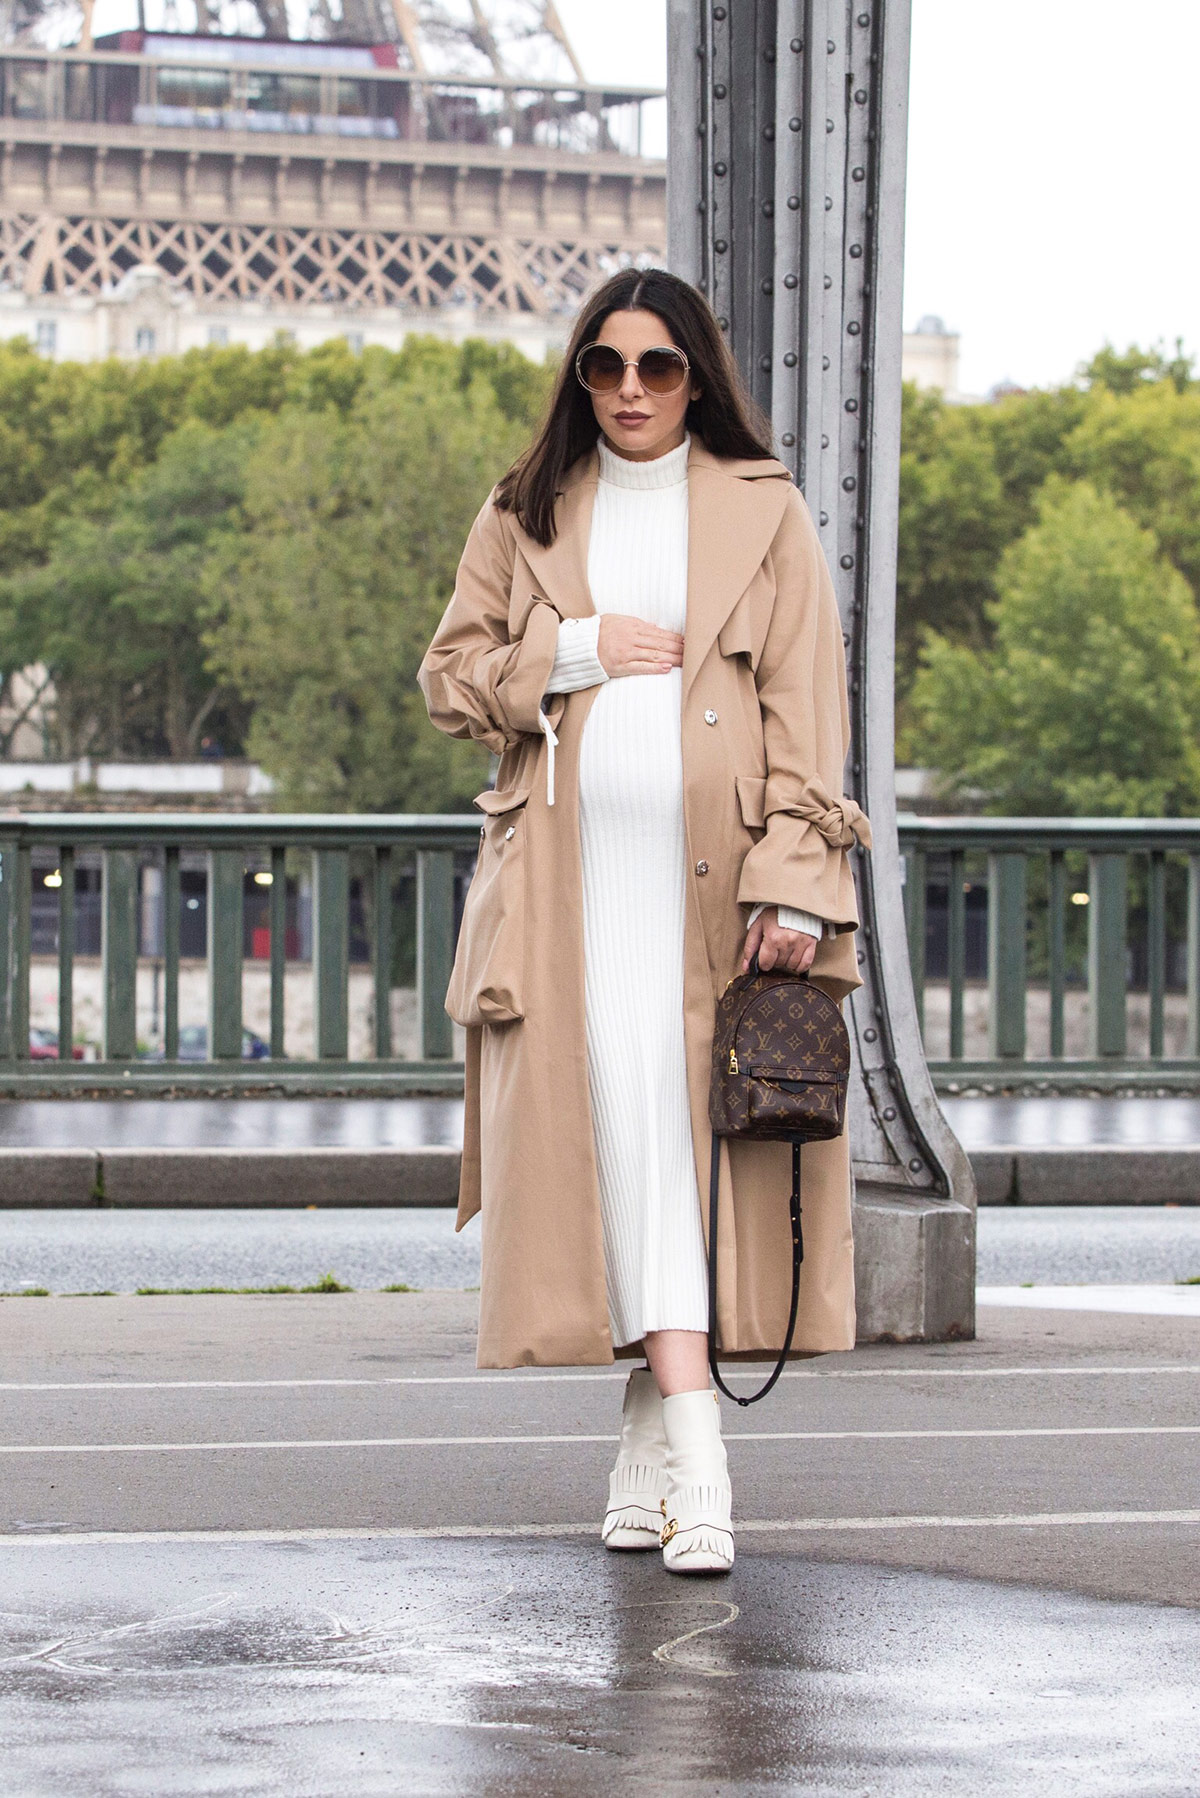 Maje ecru turtleneck dress for fall worn with camel trench coat, Gucci Marmot boots and Louis Vuitton palm springs backpack by Stella Asteria - Fashion & Lifestyle Blogger in Paris - Paris Street Style & Pregnancy Style inspiration